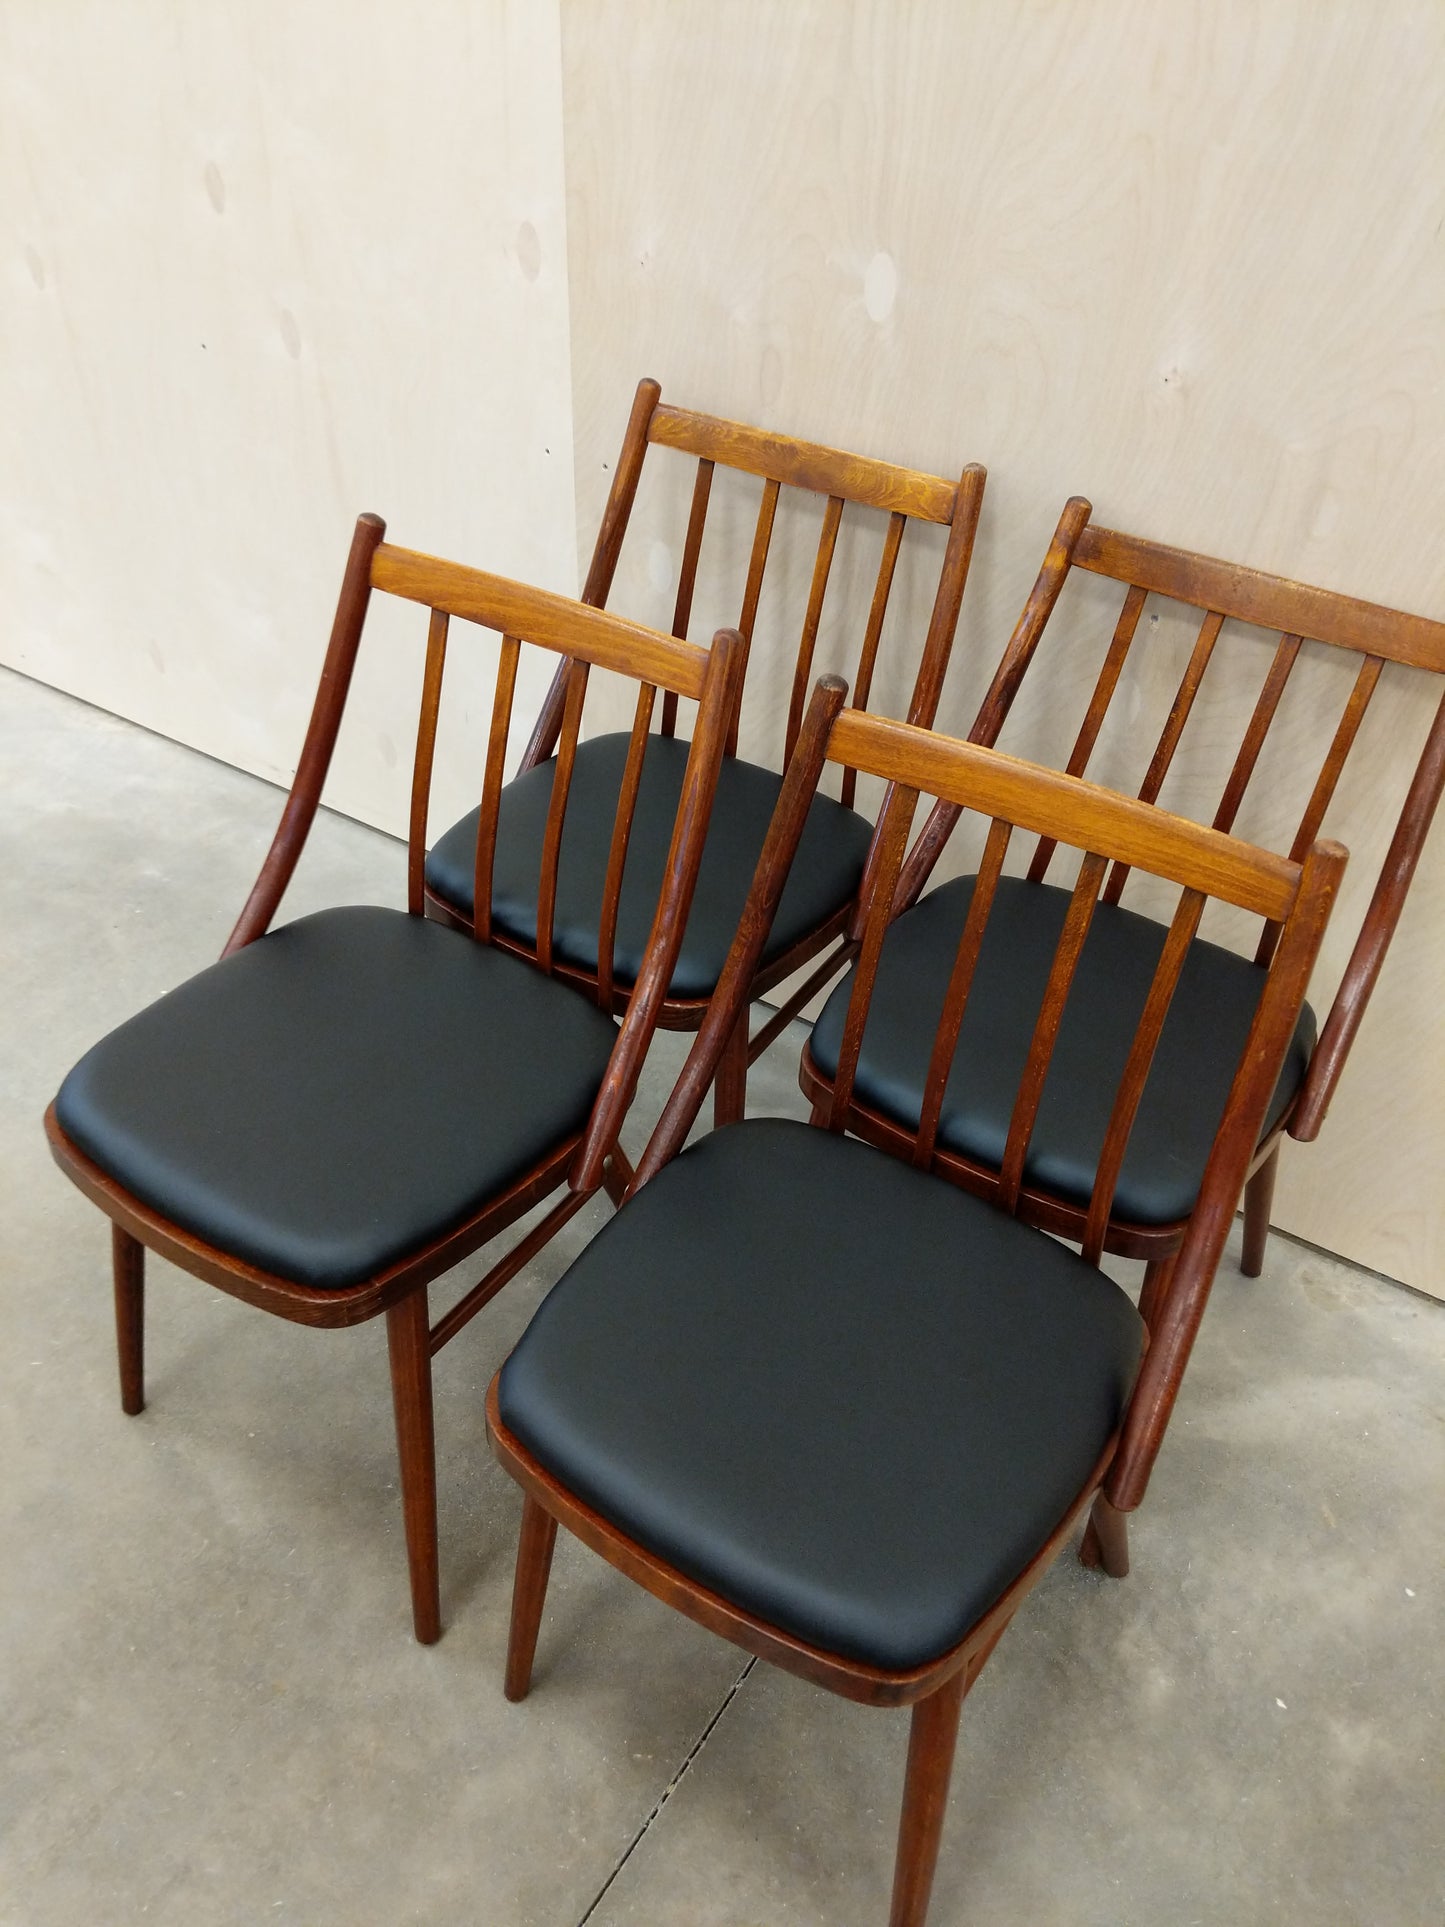 Set of 4 Vintage Czech Dining Chairs